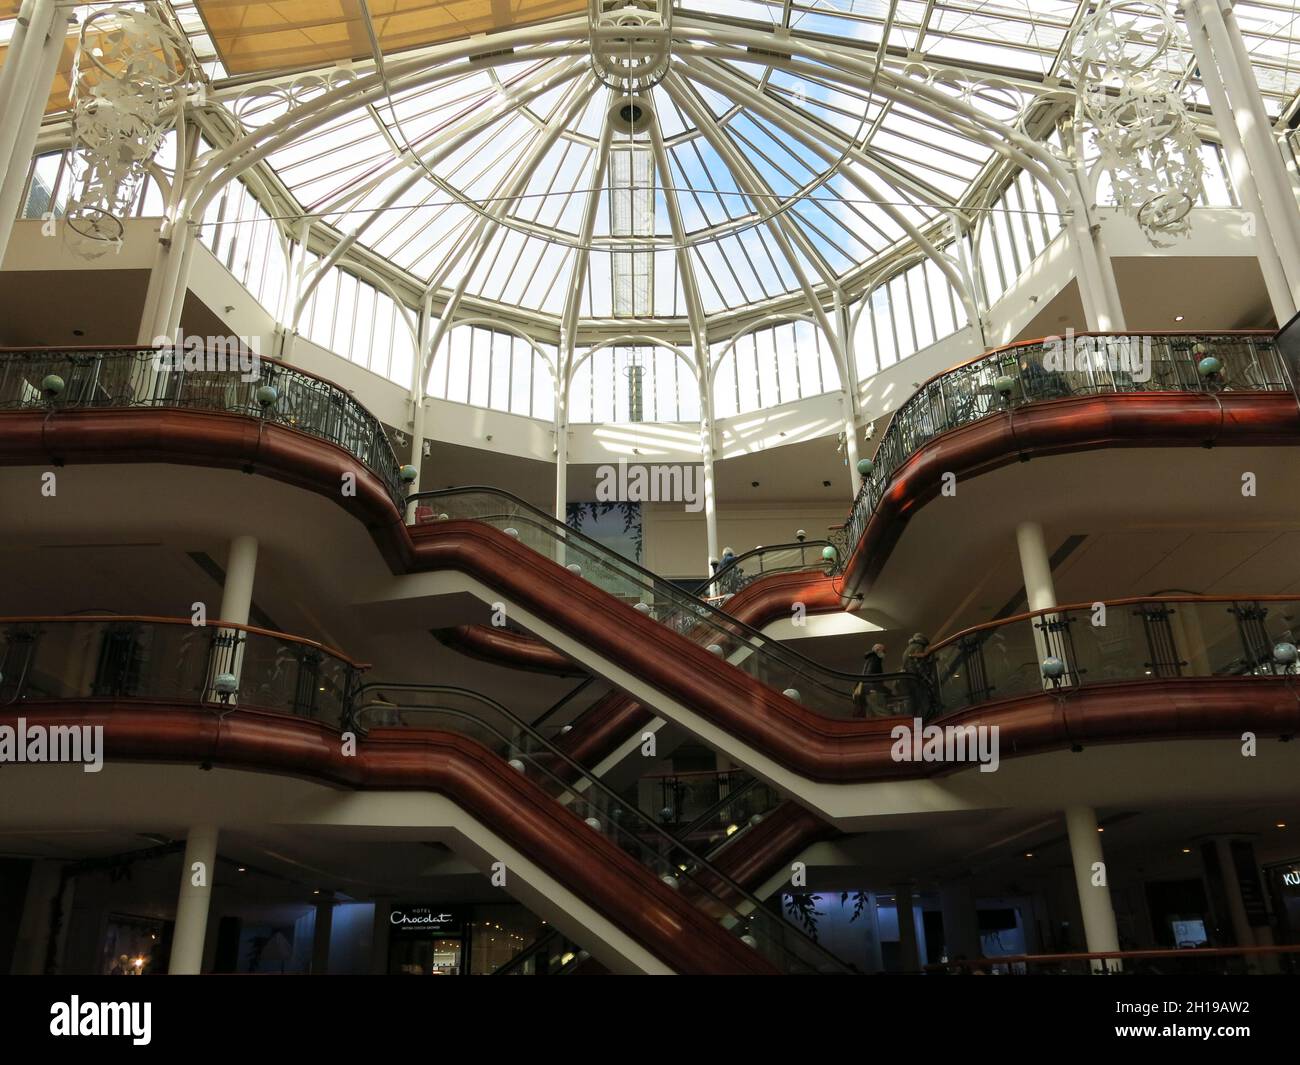 Winner of many design awards, Princes Square is an up-market shopping centre in central Glasgow with many architectural features and grand staircases. Stock Photo